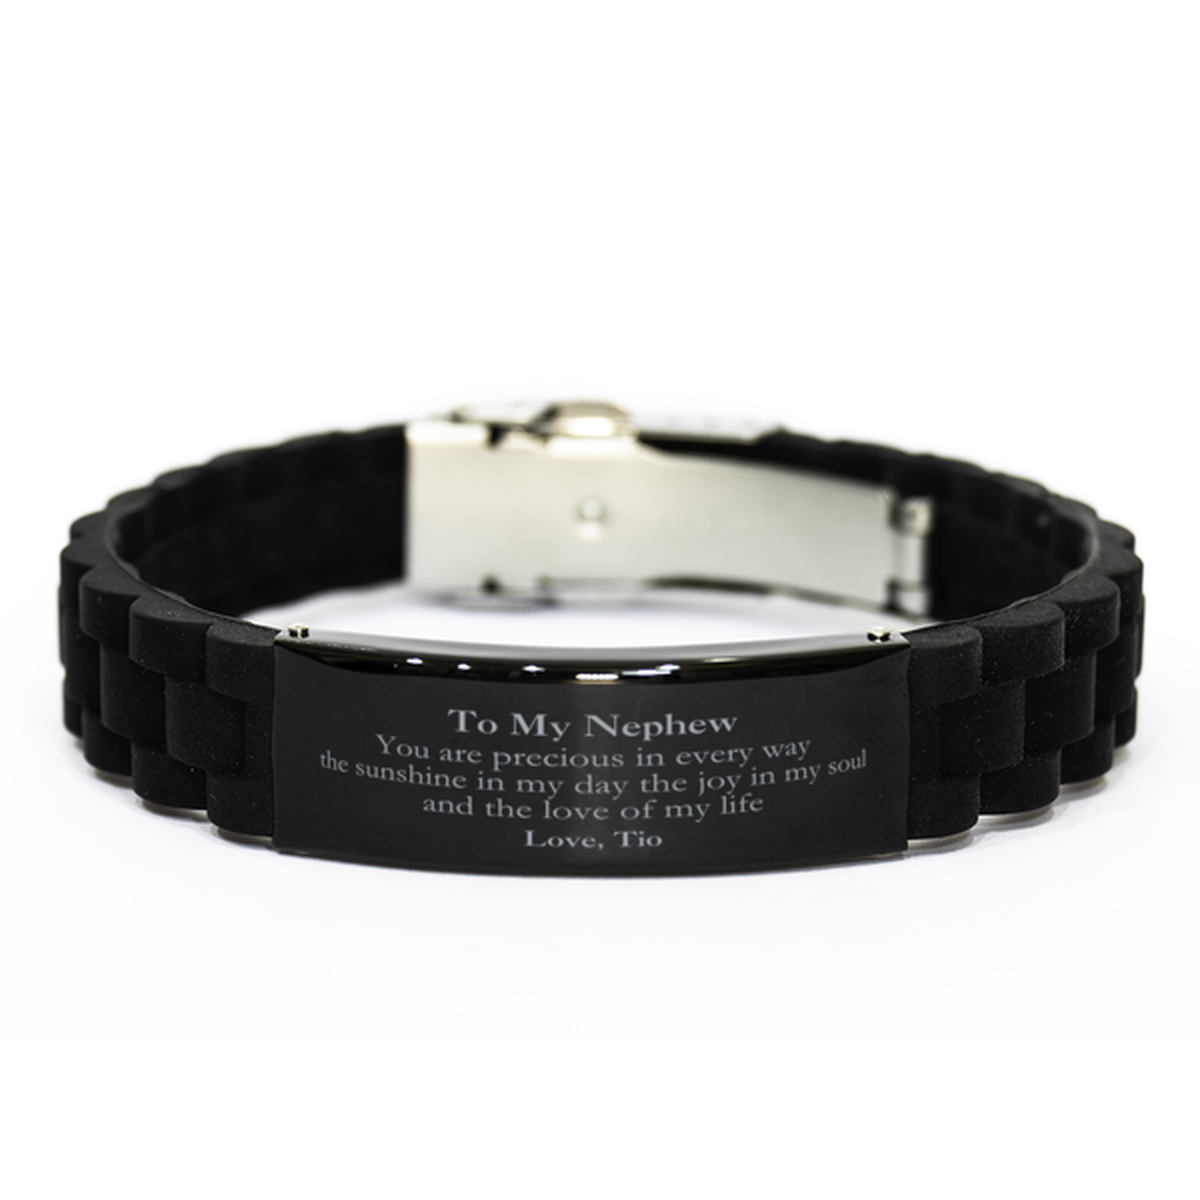 Graduation Gifts for Nephew Black Glidelock Clasp Bracelet Present from Tio, Christmas Nephew Birthday Gifts Nephew You are precious in every way the sunshine in my day. Love, Tio